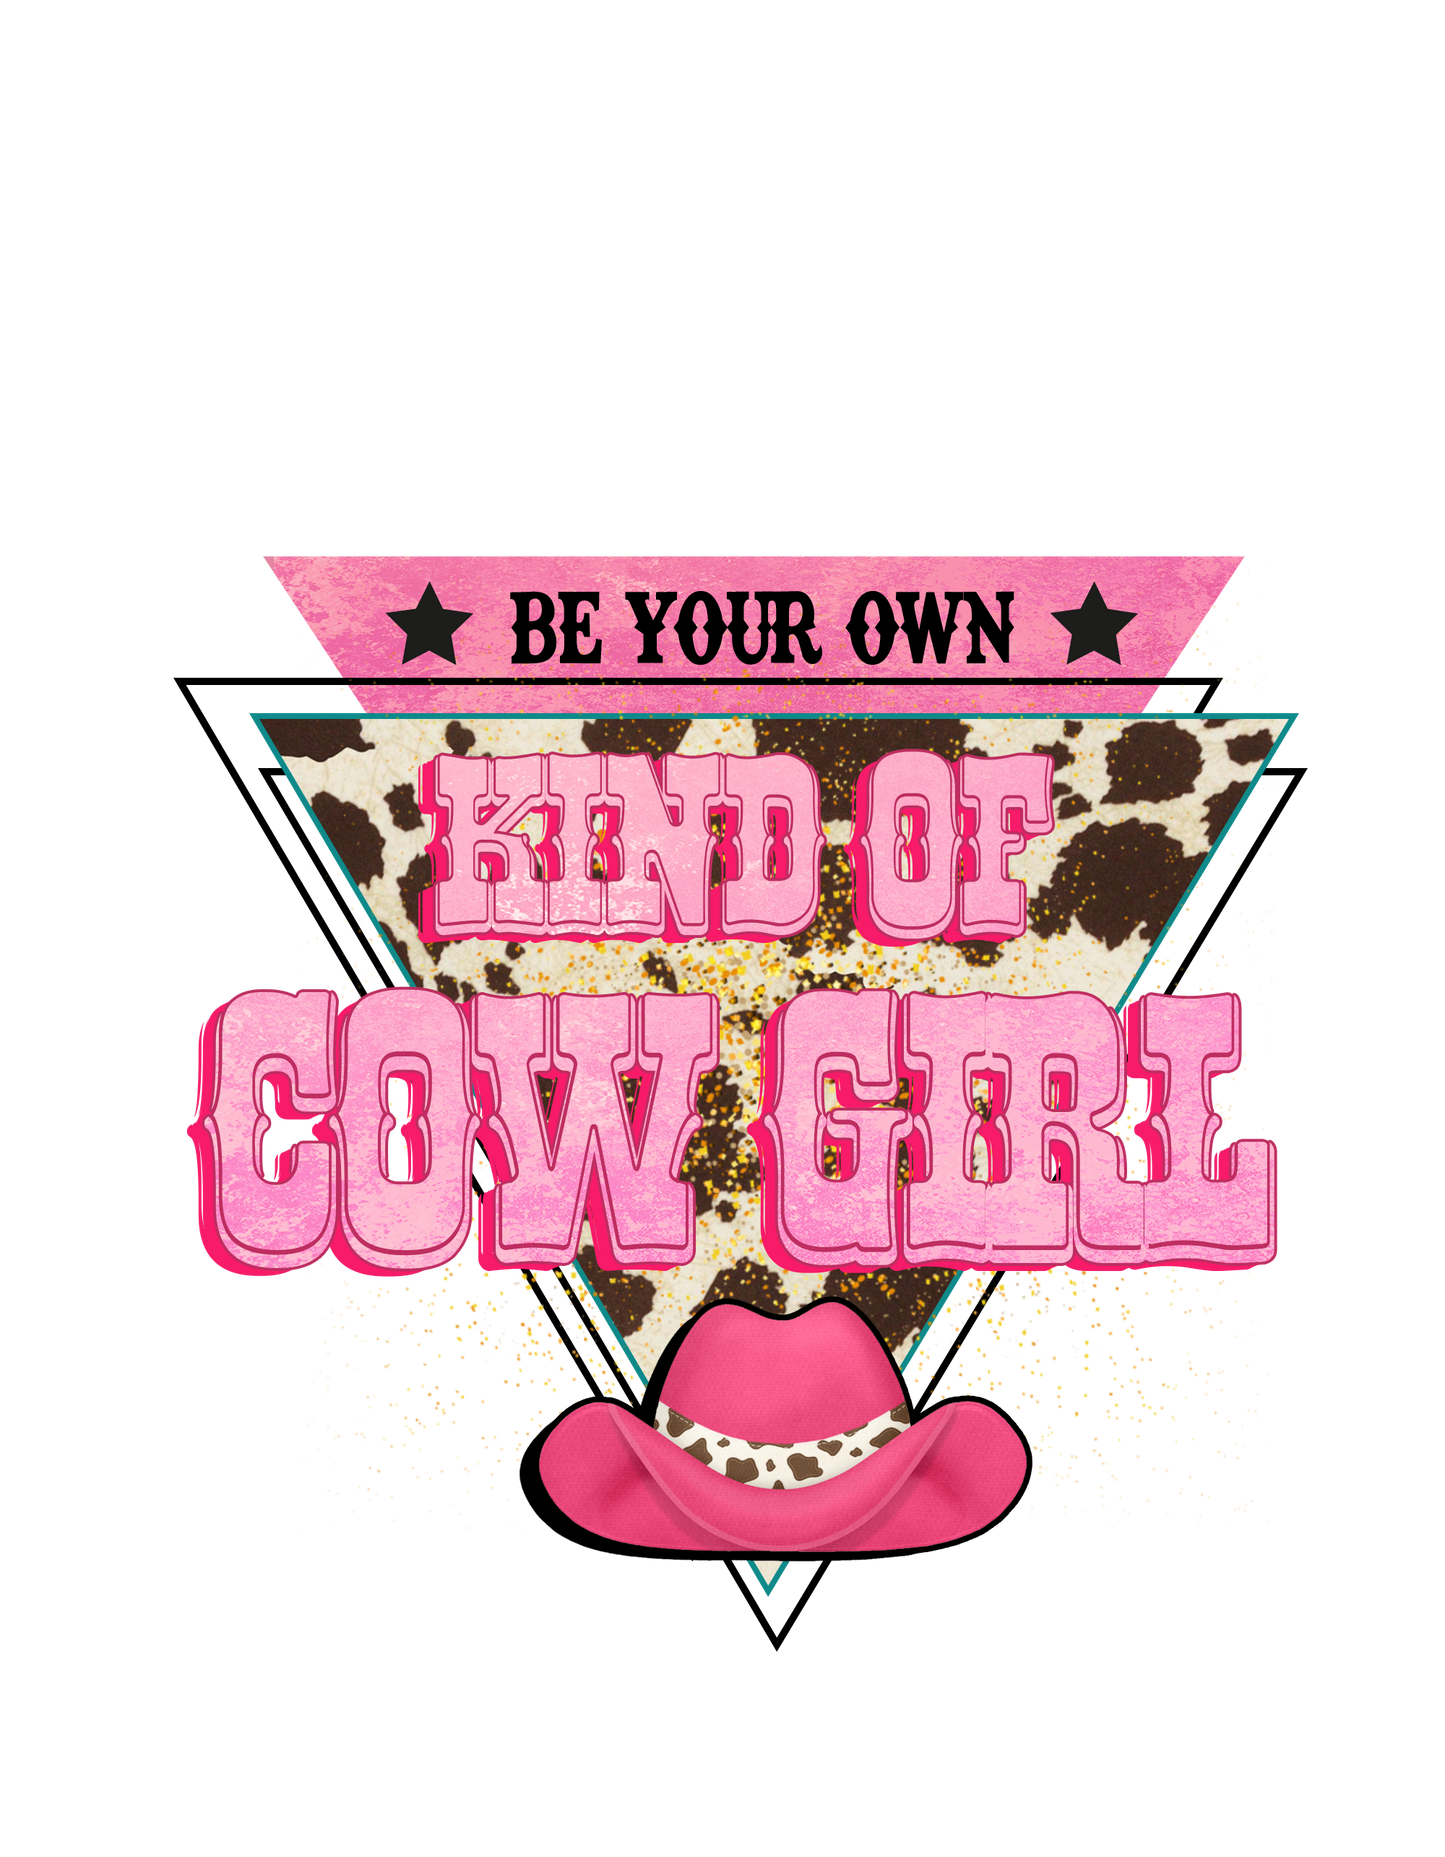 Be Your Own Kind of Cowgirl